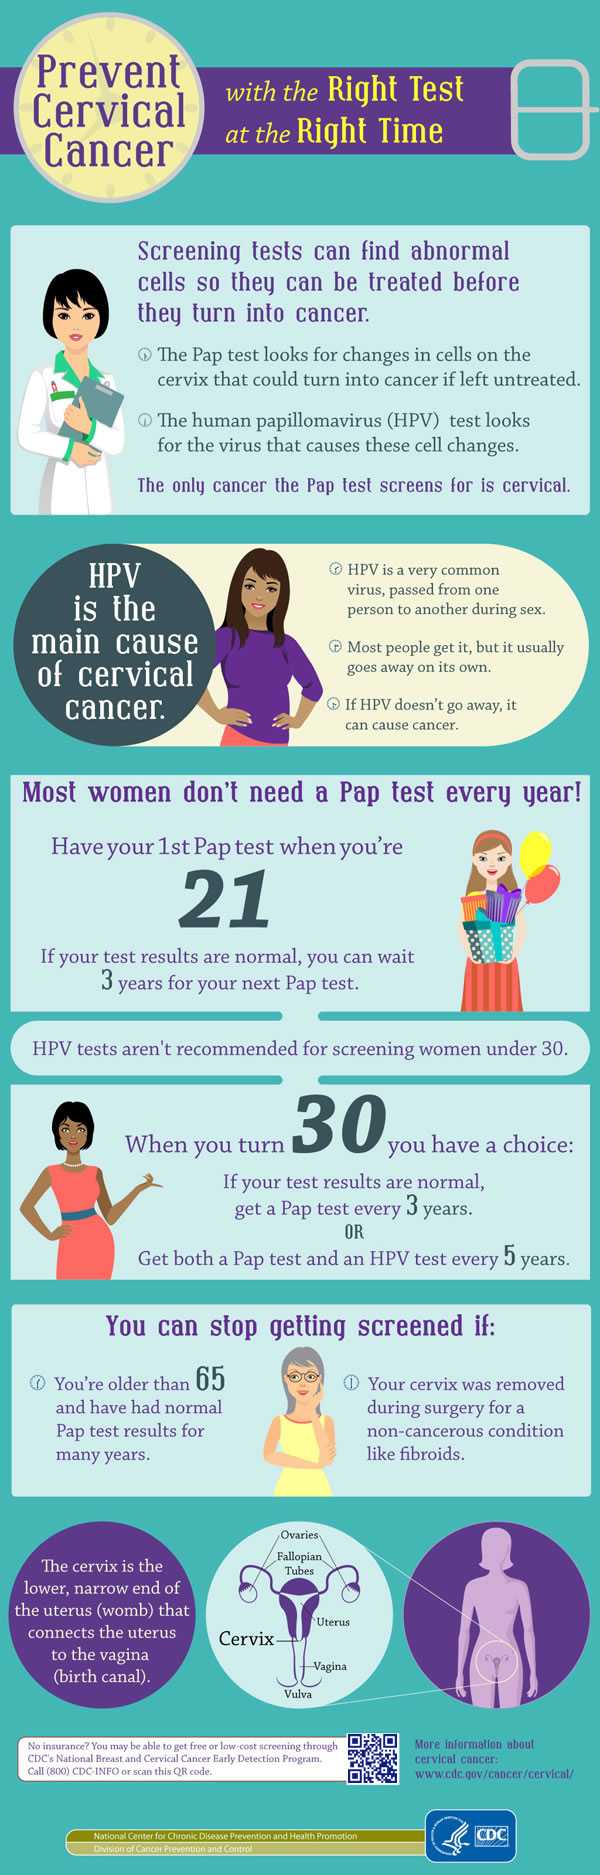 Infographic titled Prevent Cervical Cancer with the Right Test at the Right Time. The text on the infographic is reproduced below.